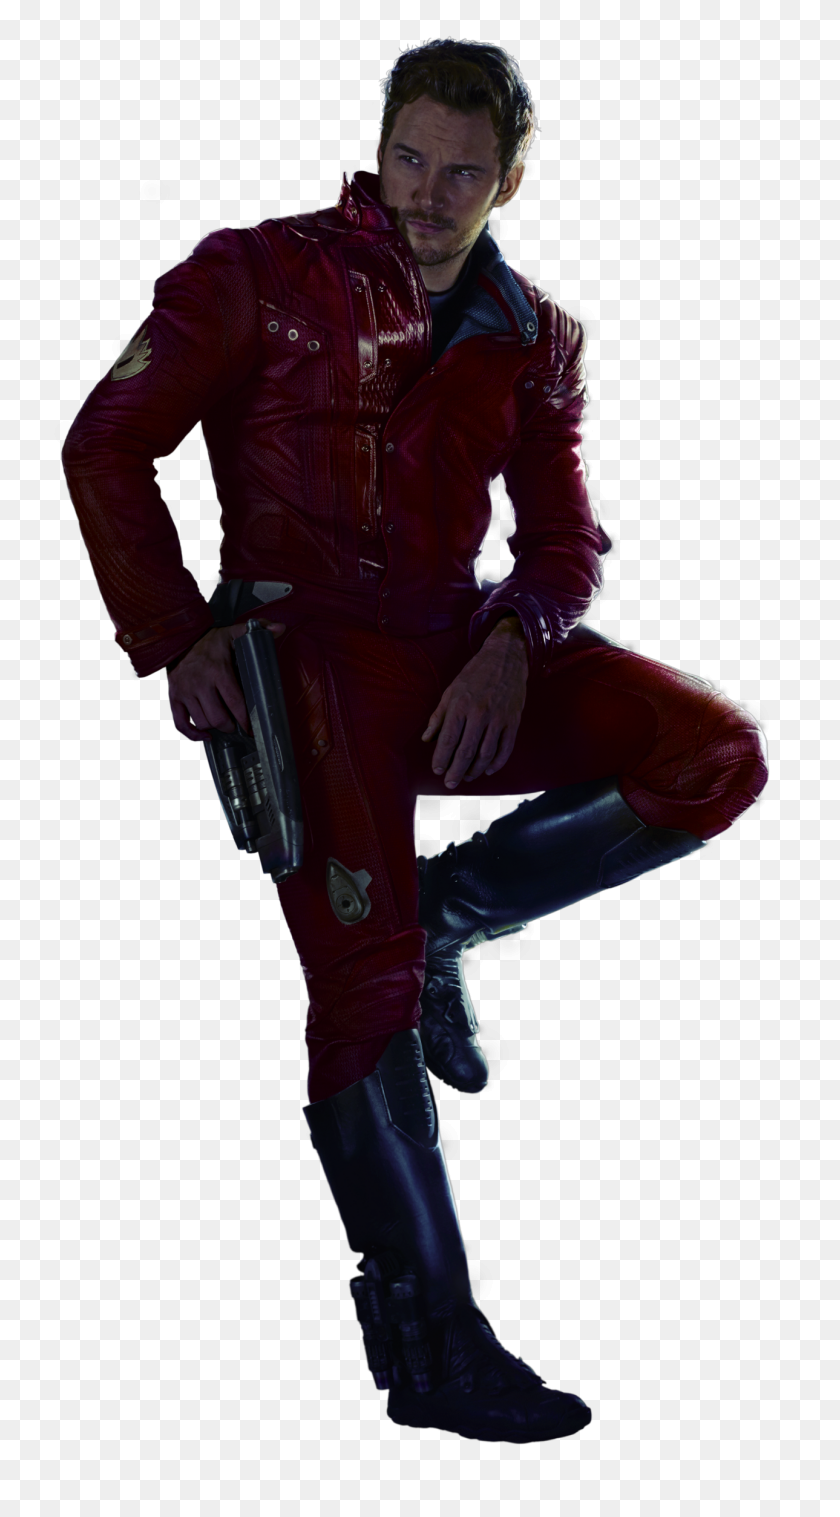 1289x2408 Imagen - Starlord Png